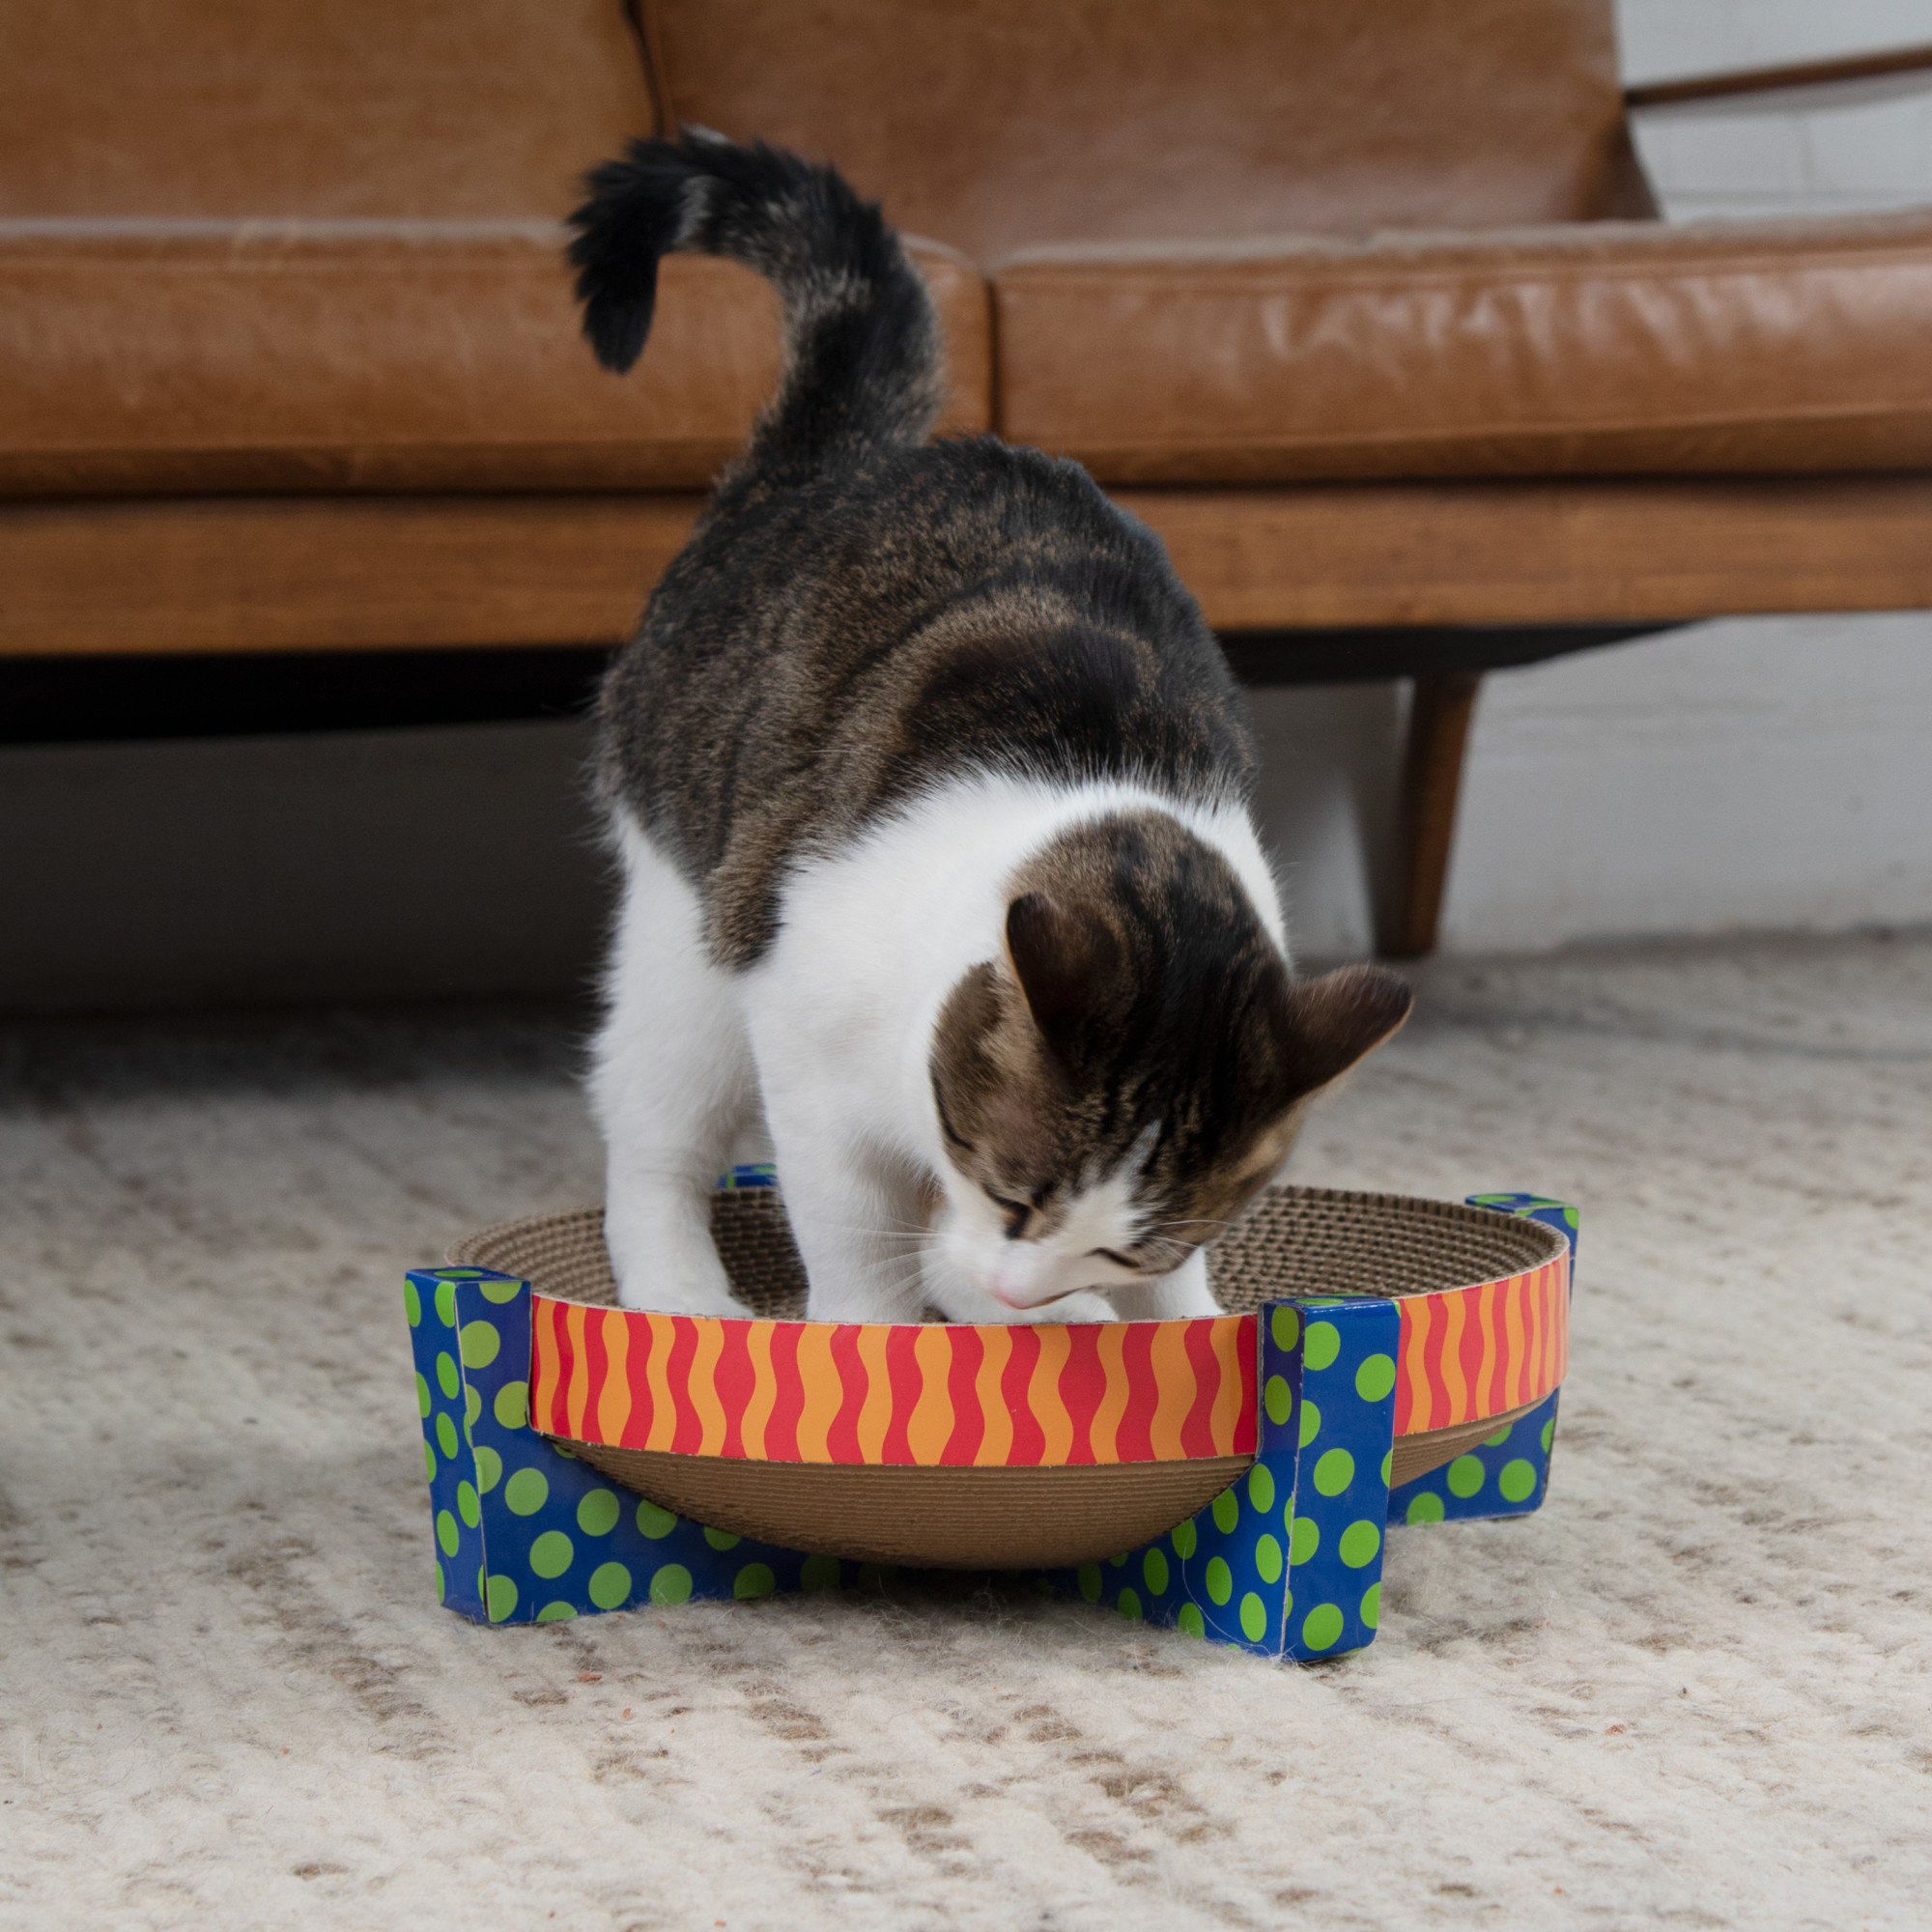 How Long Do Catnip Toys Last? Find Out the Shelf Life of Your Kitty's Favorite Toy!